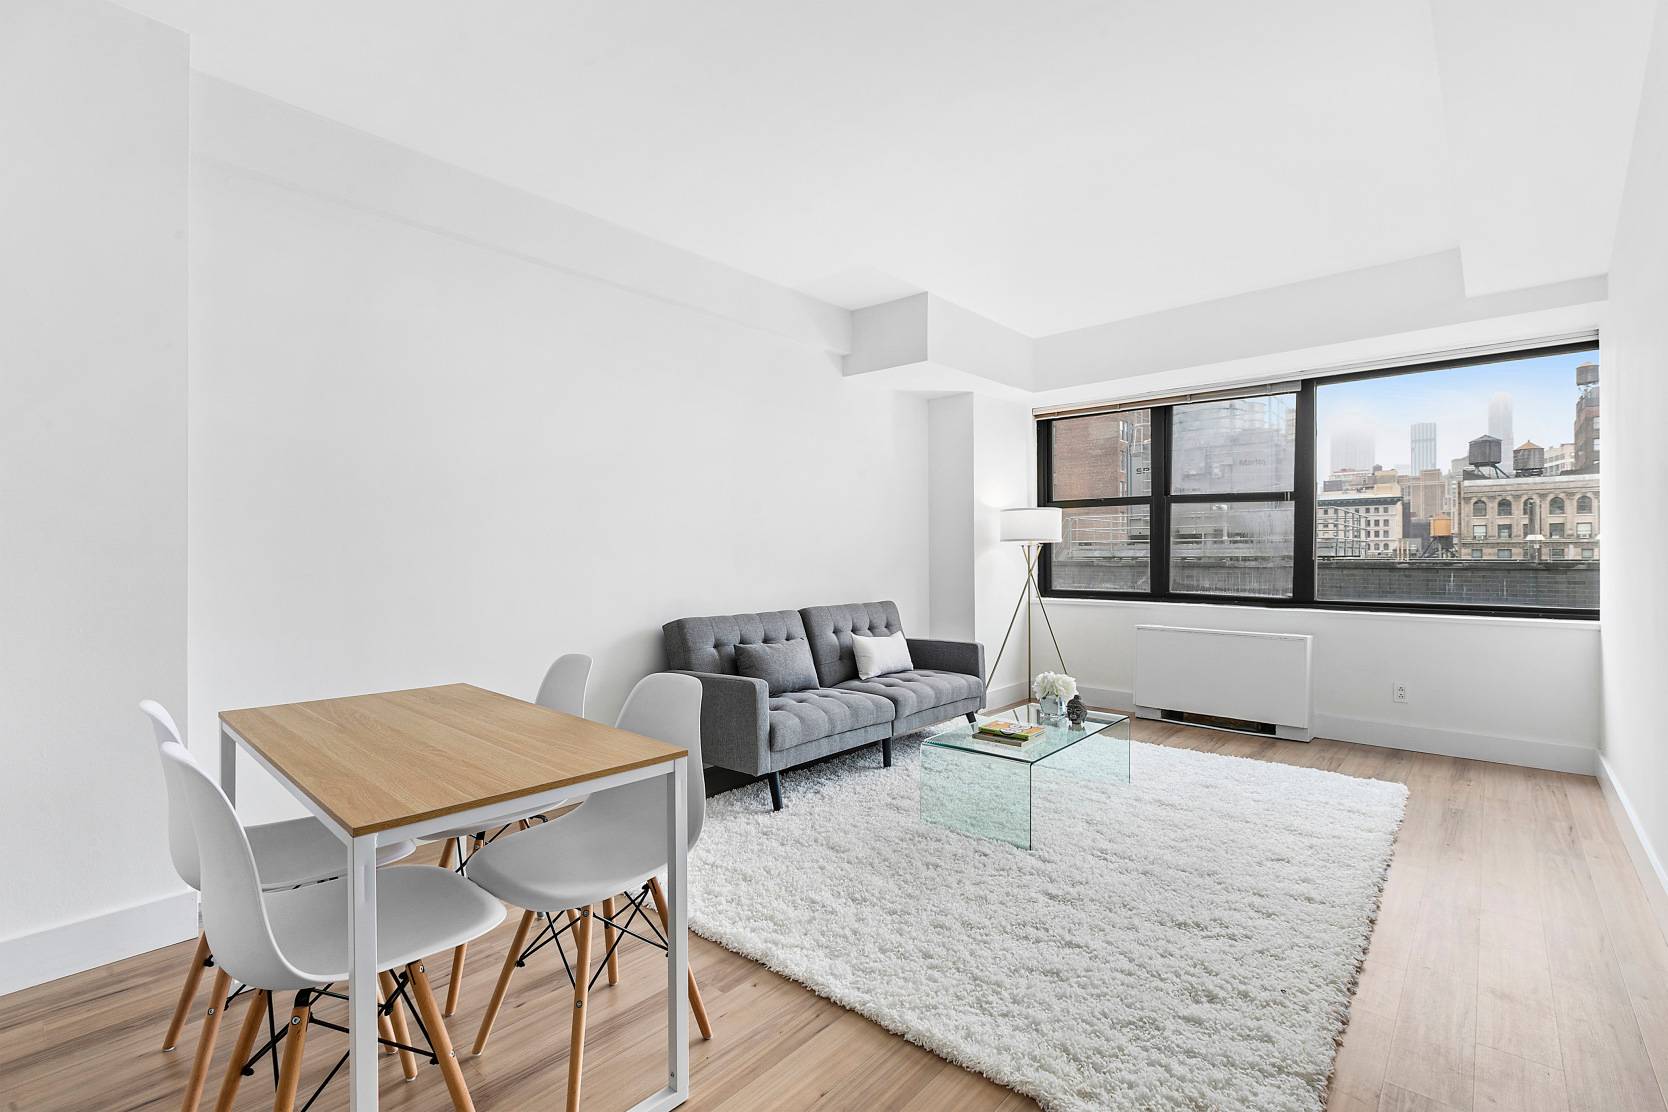 A sunny, peaceful, tranquil oasis in the heart of Union Square, residence 1602 at the Victoria is a north facing 16th floor home, with 9 ceilings and iconic Empire State ...